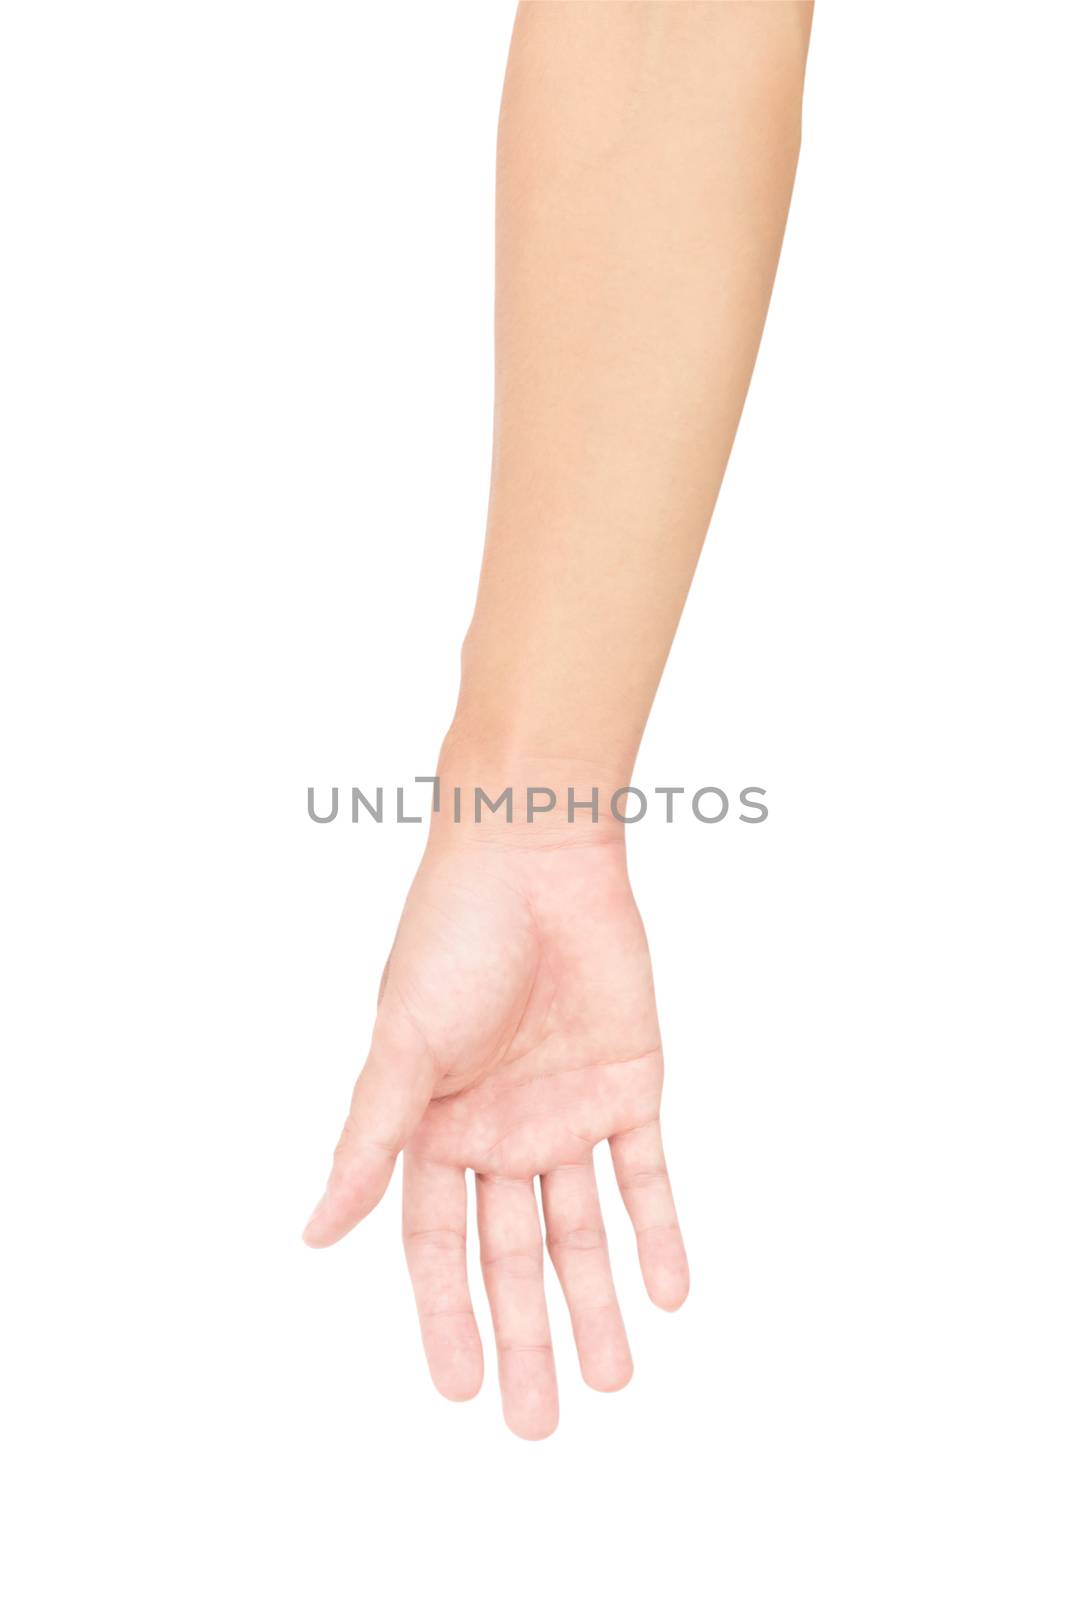 Man arm with blood veins on white background with clipping path, by pt.pongsak@gmail.com